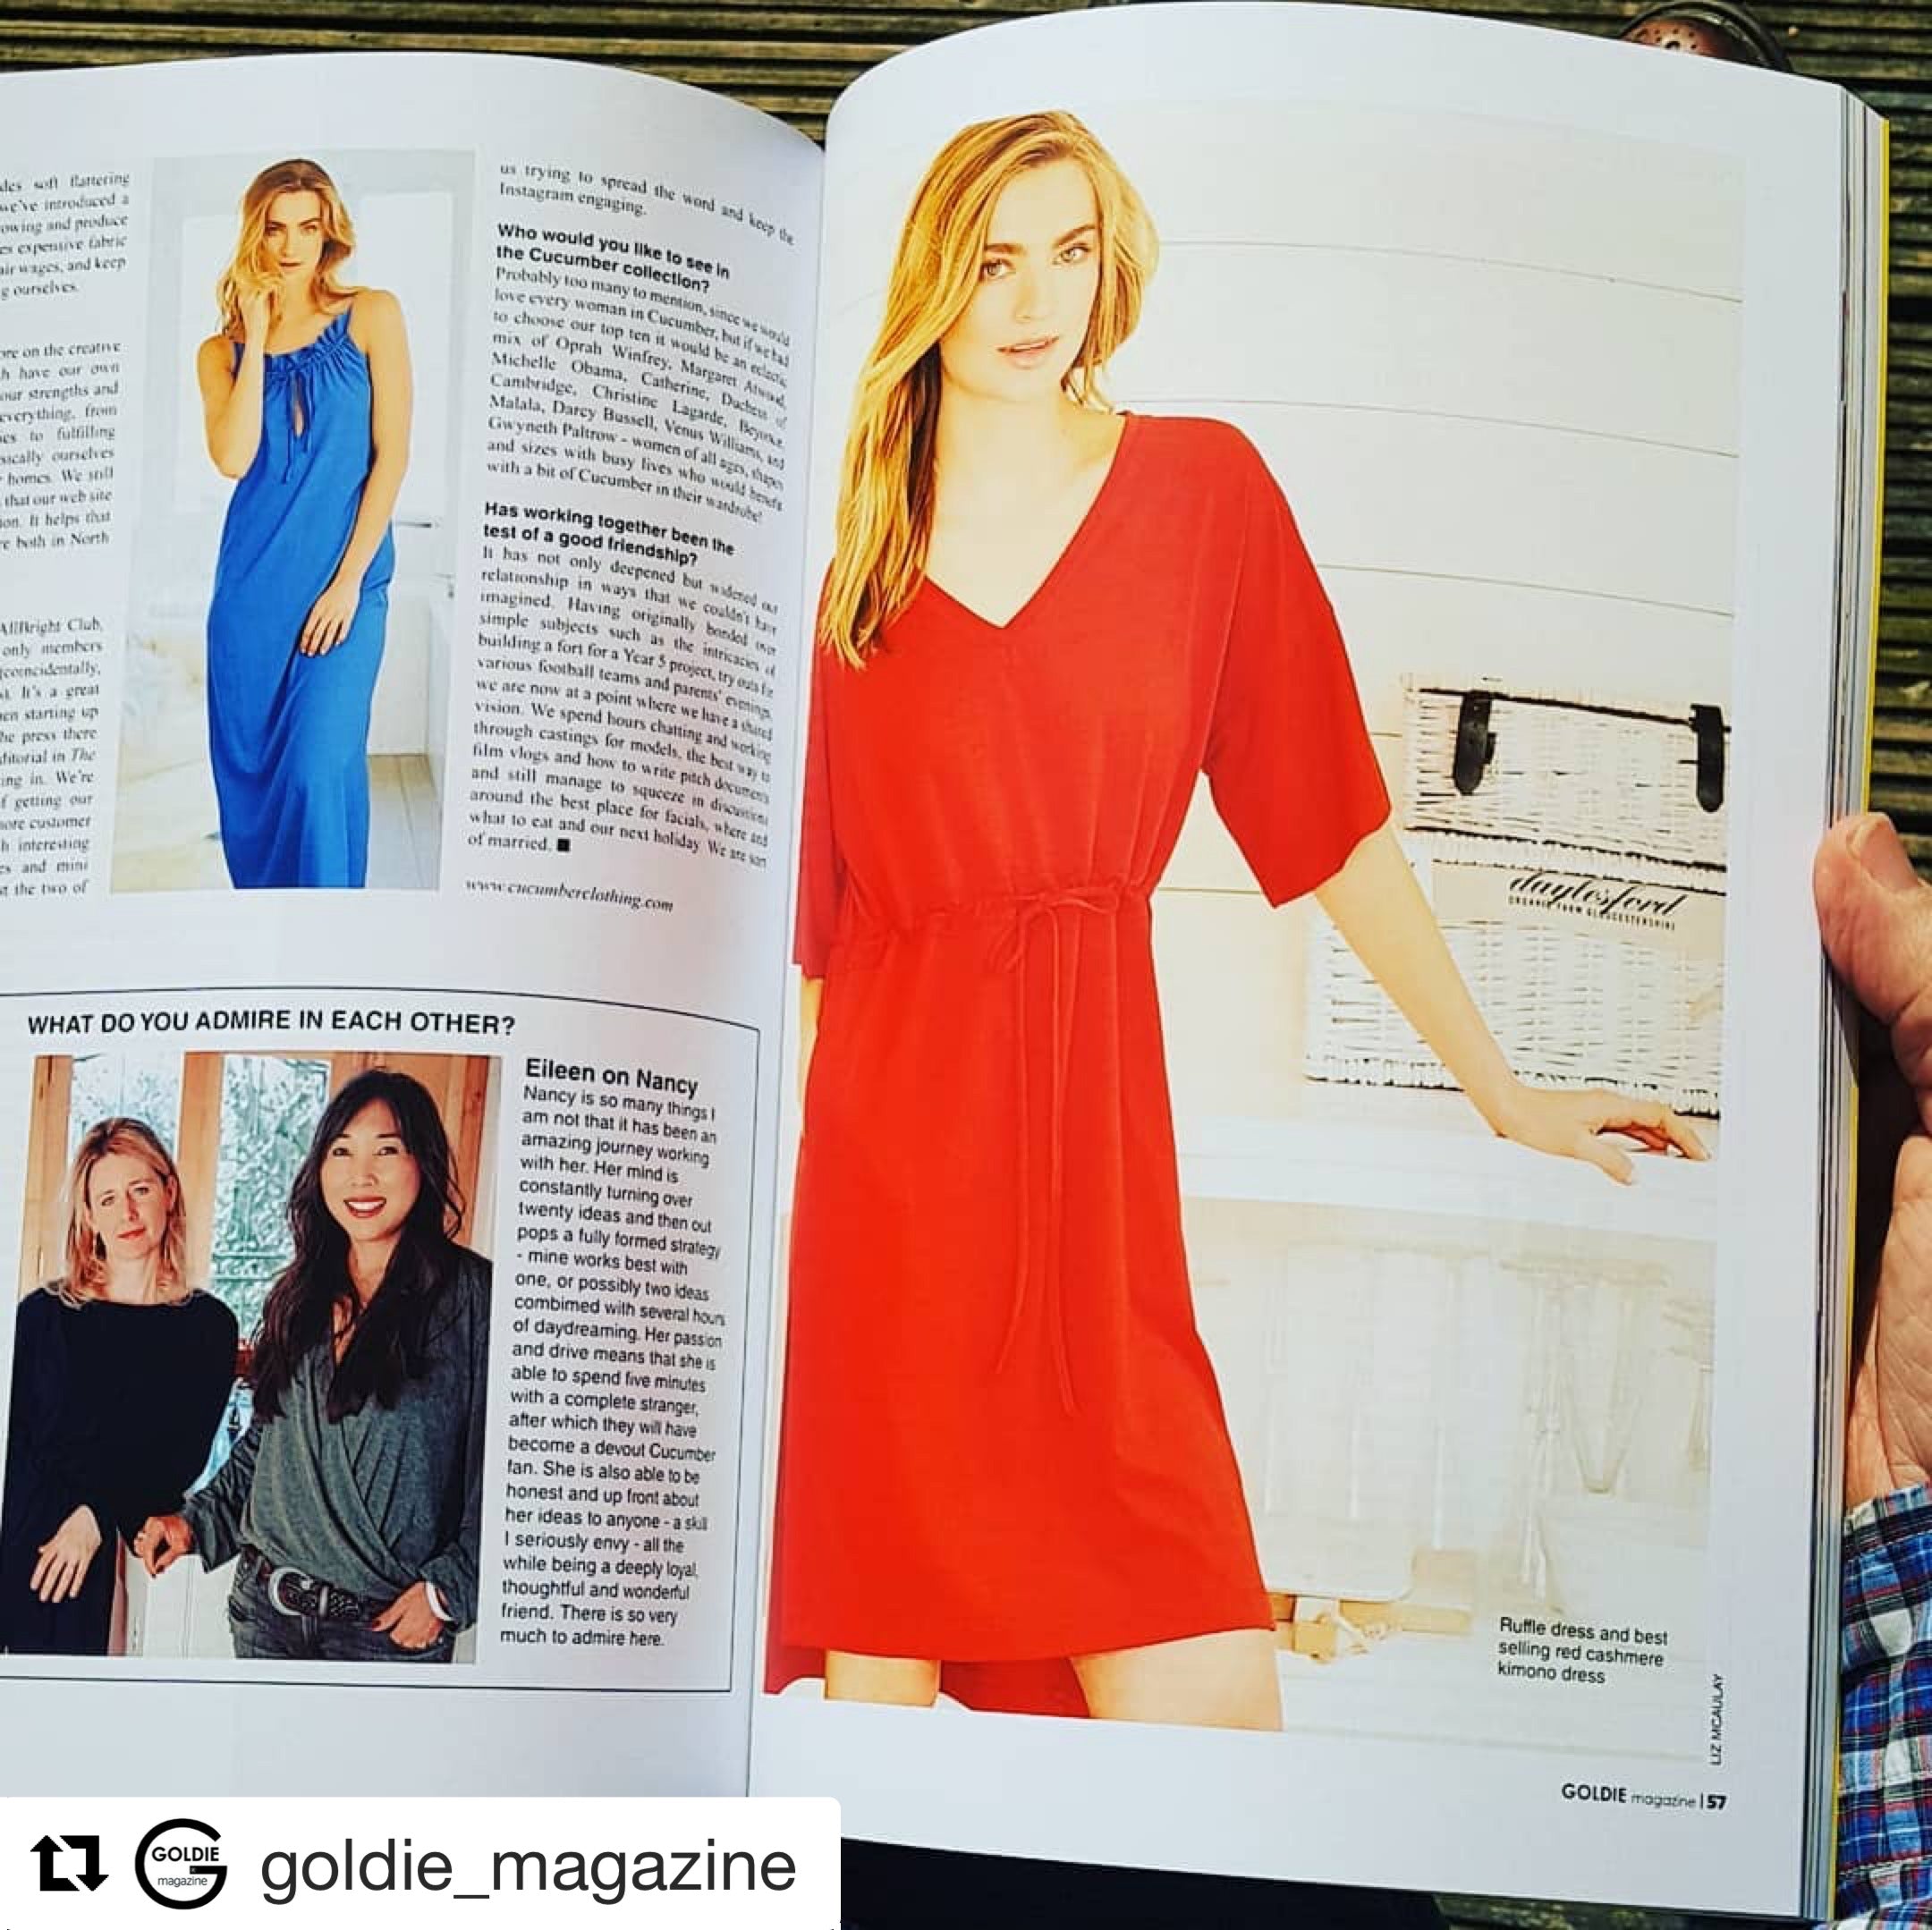 Goldie Magazine features Cucumber Clothing founders Nancy Zeffman and Eileen Willett and their wicking, cooling, fashtech brand Cucumber Clothing